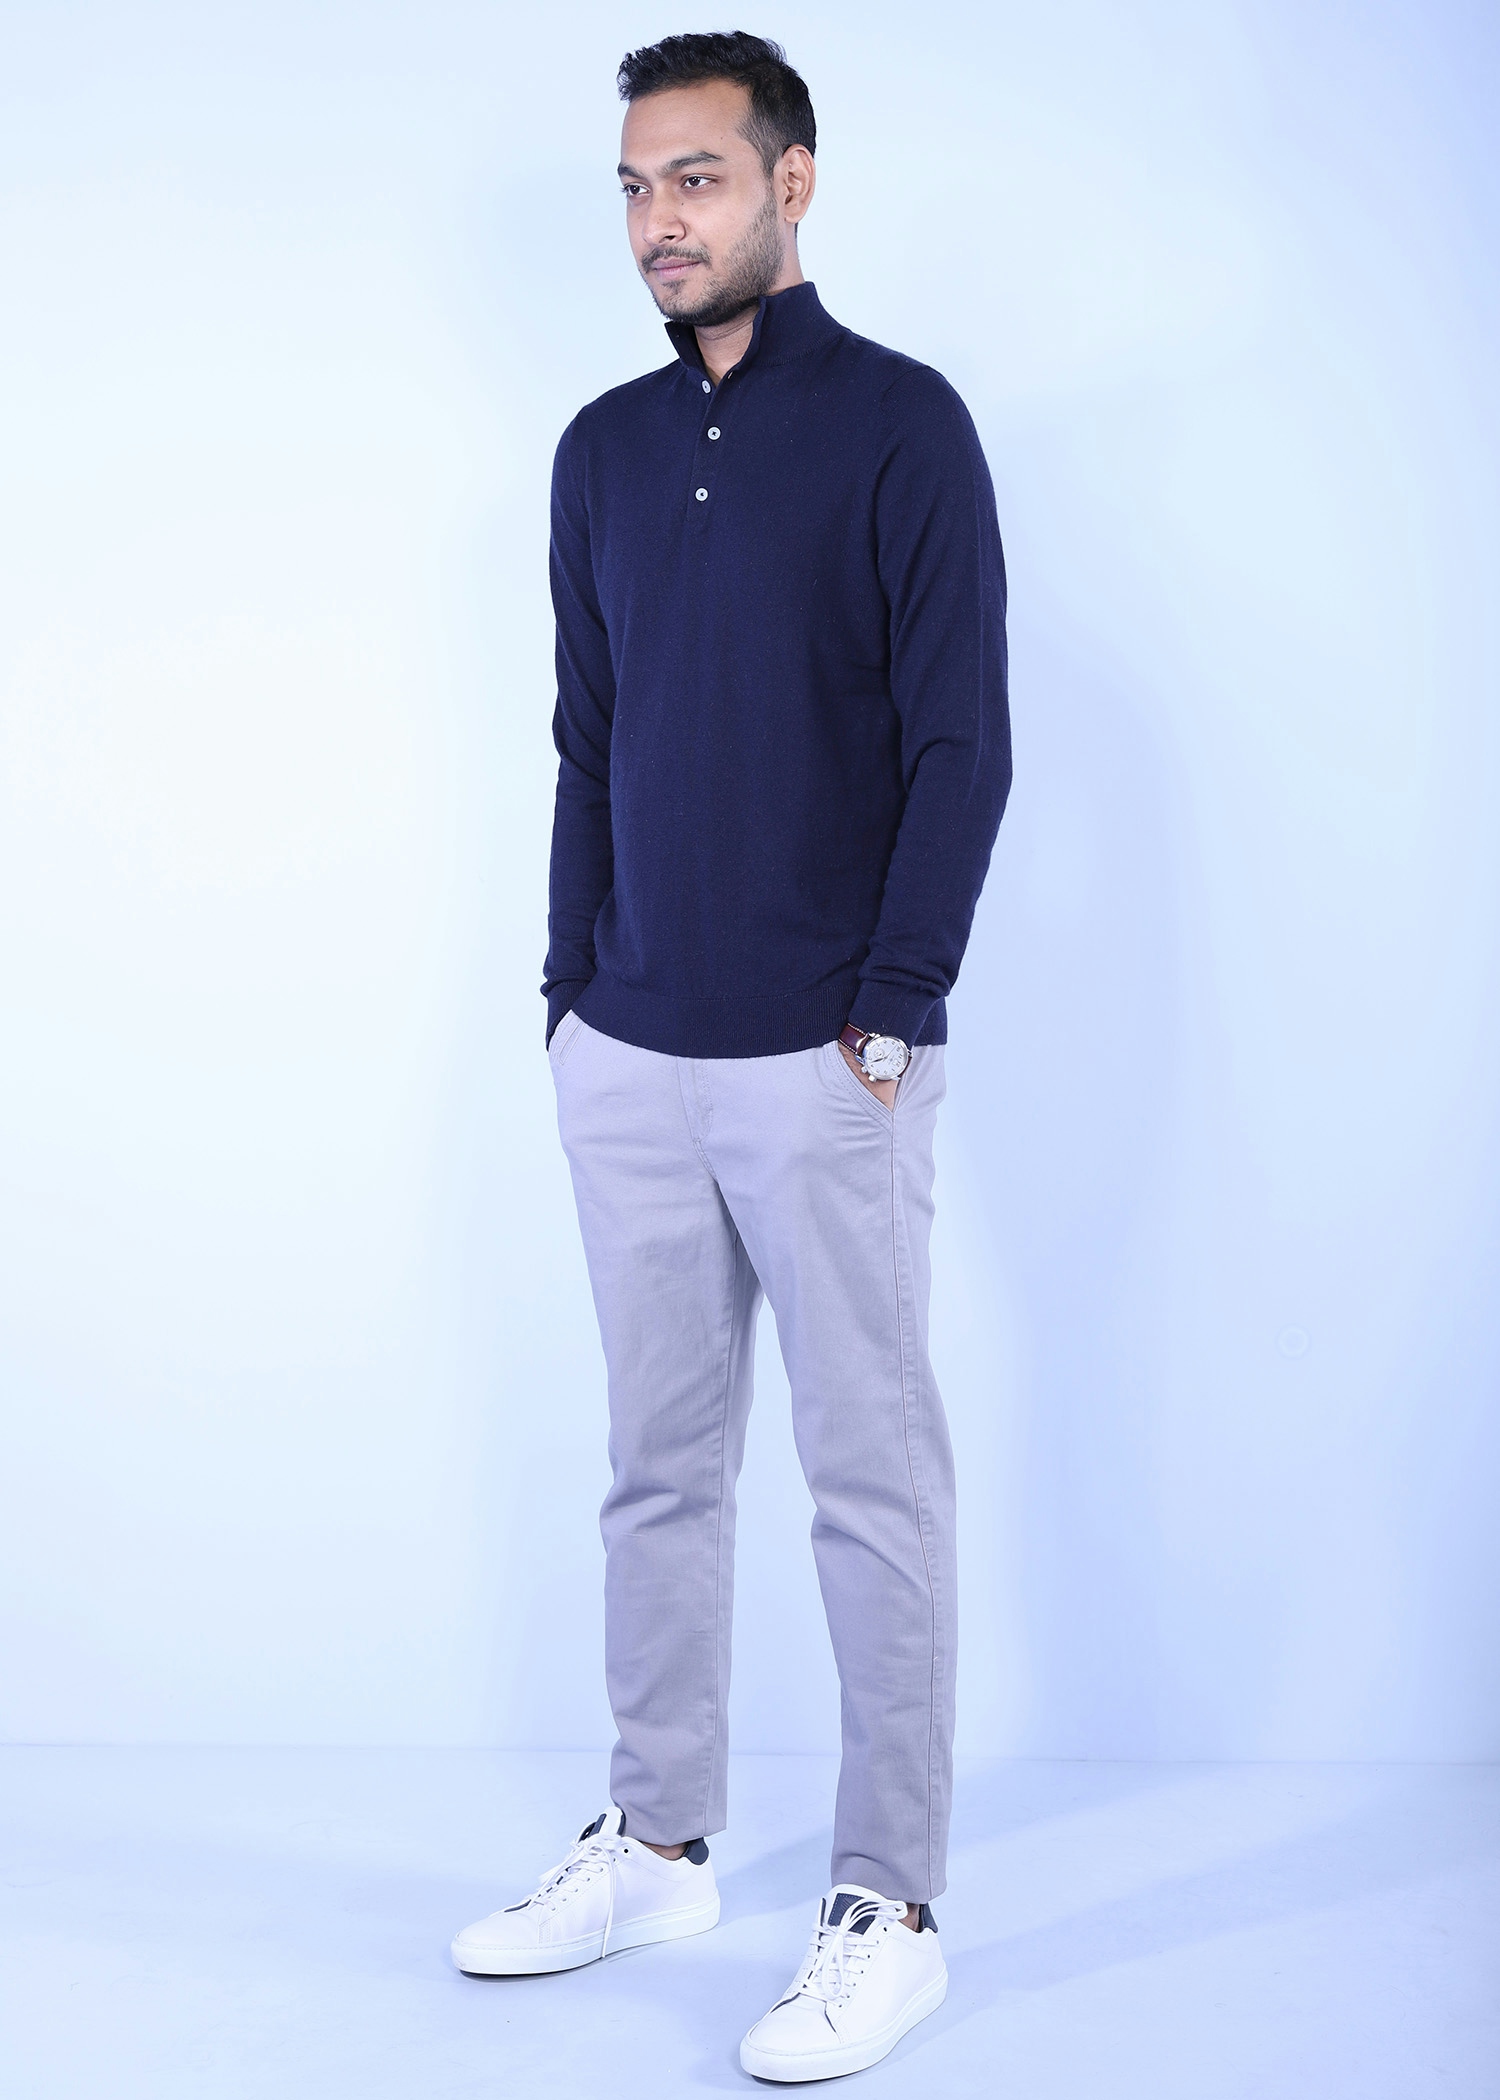 hornero i sweater navy color side view